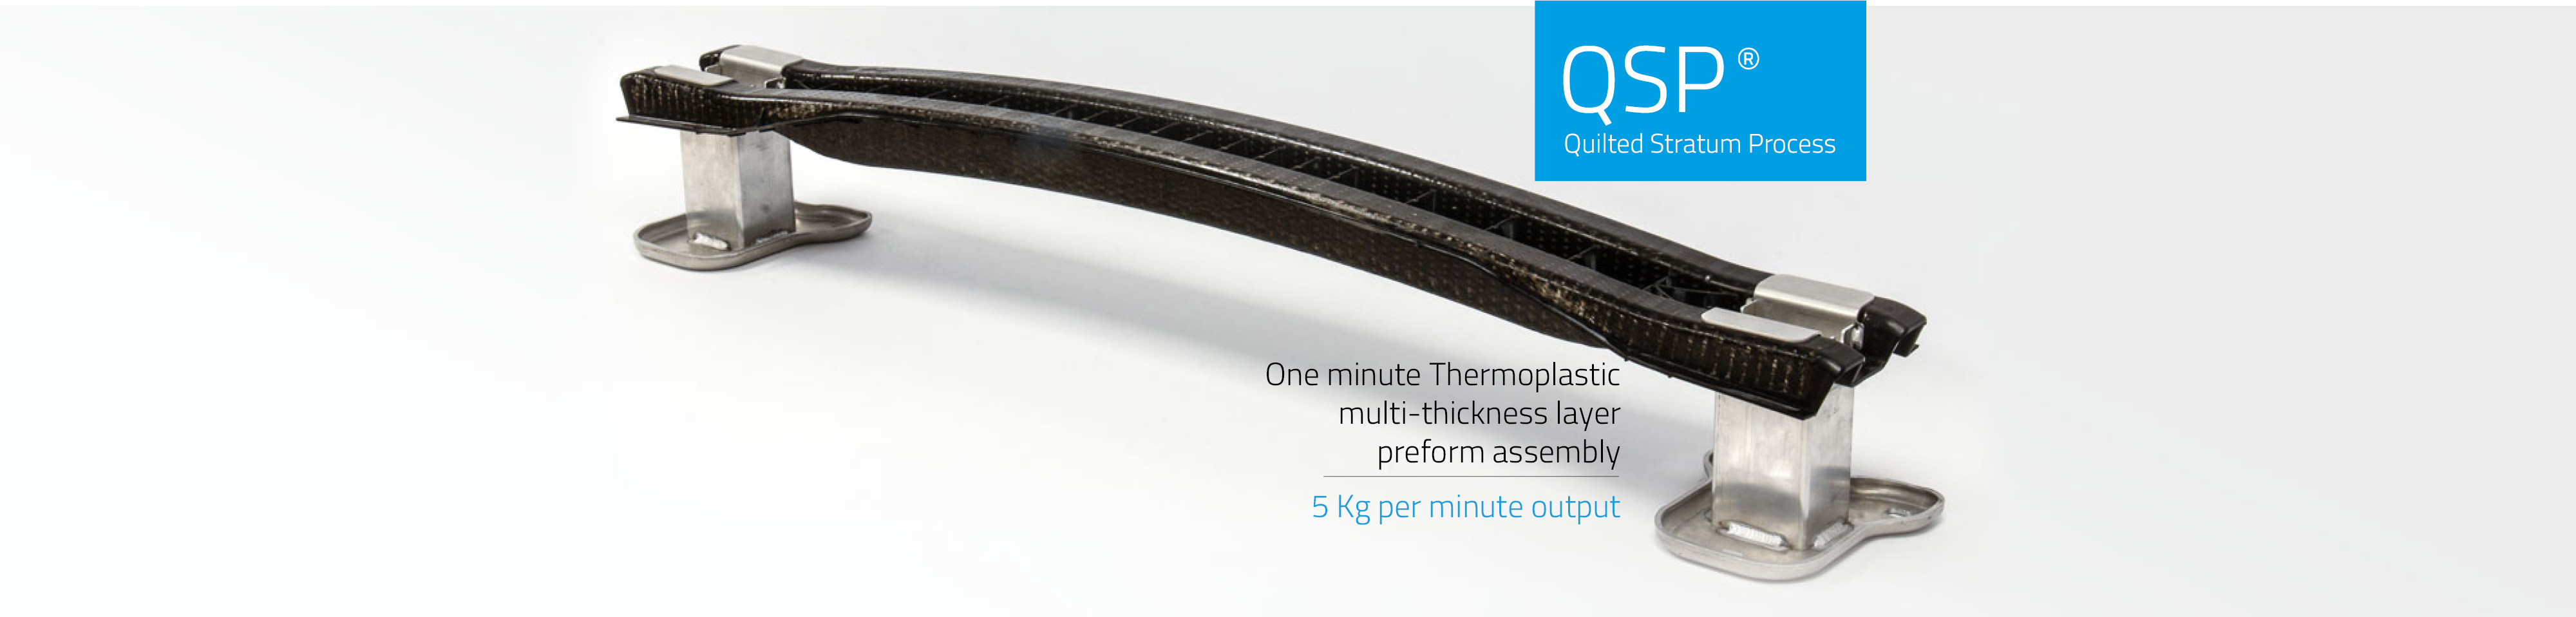 PINETTE PEI designed and manufactured a one minute cycle time process for thermoplastic multi thickness layer preform assembly